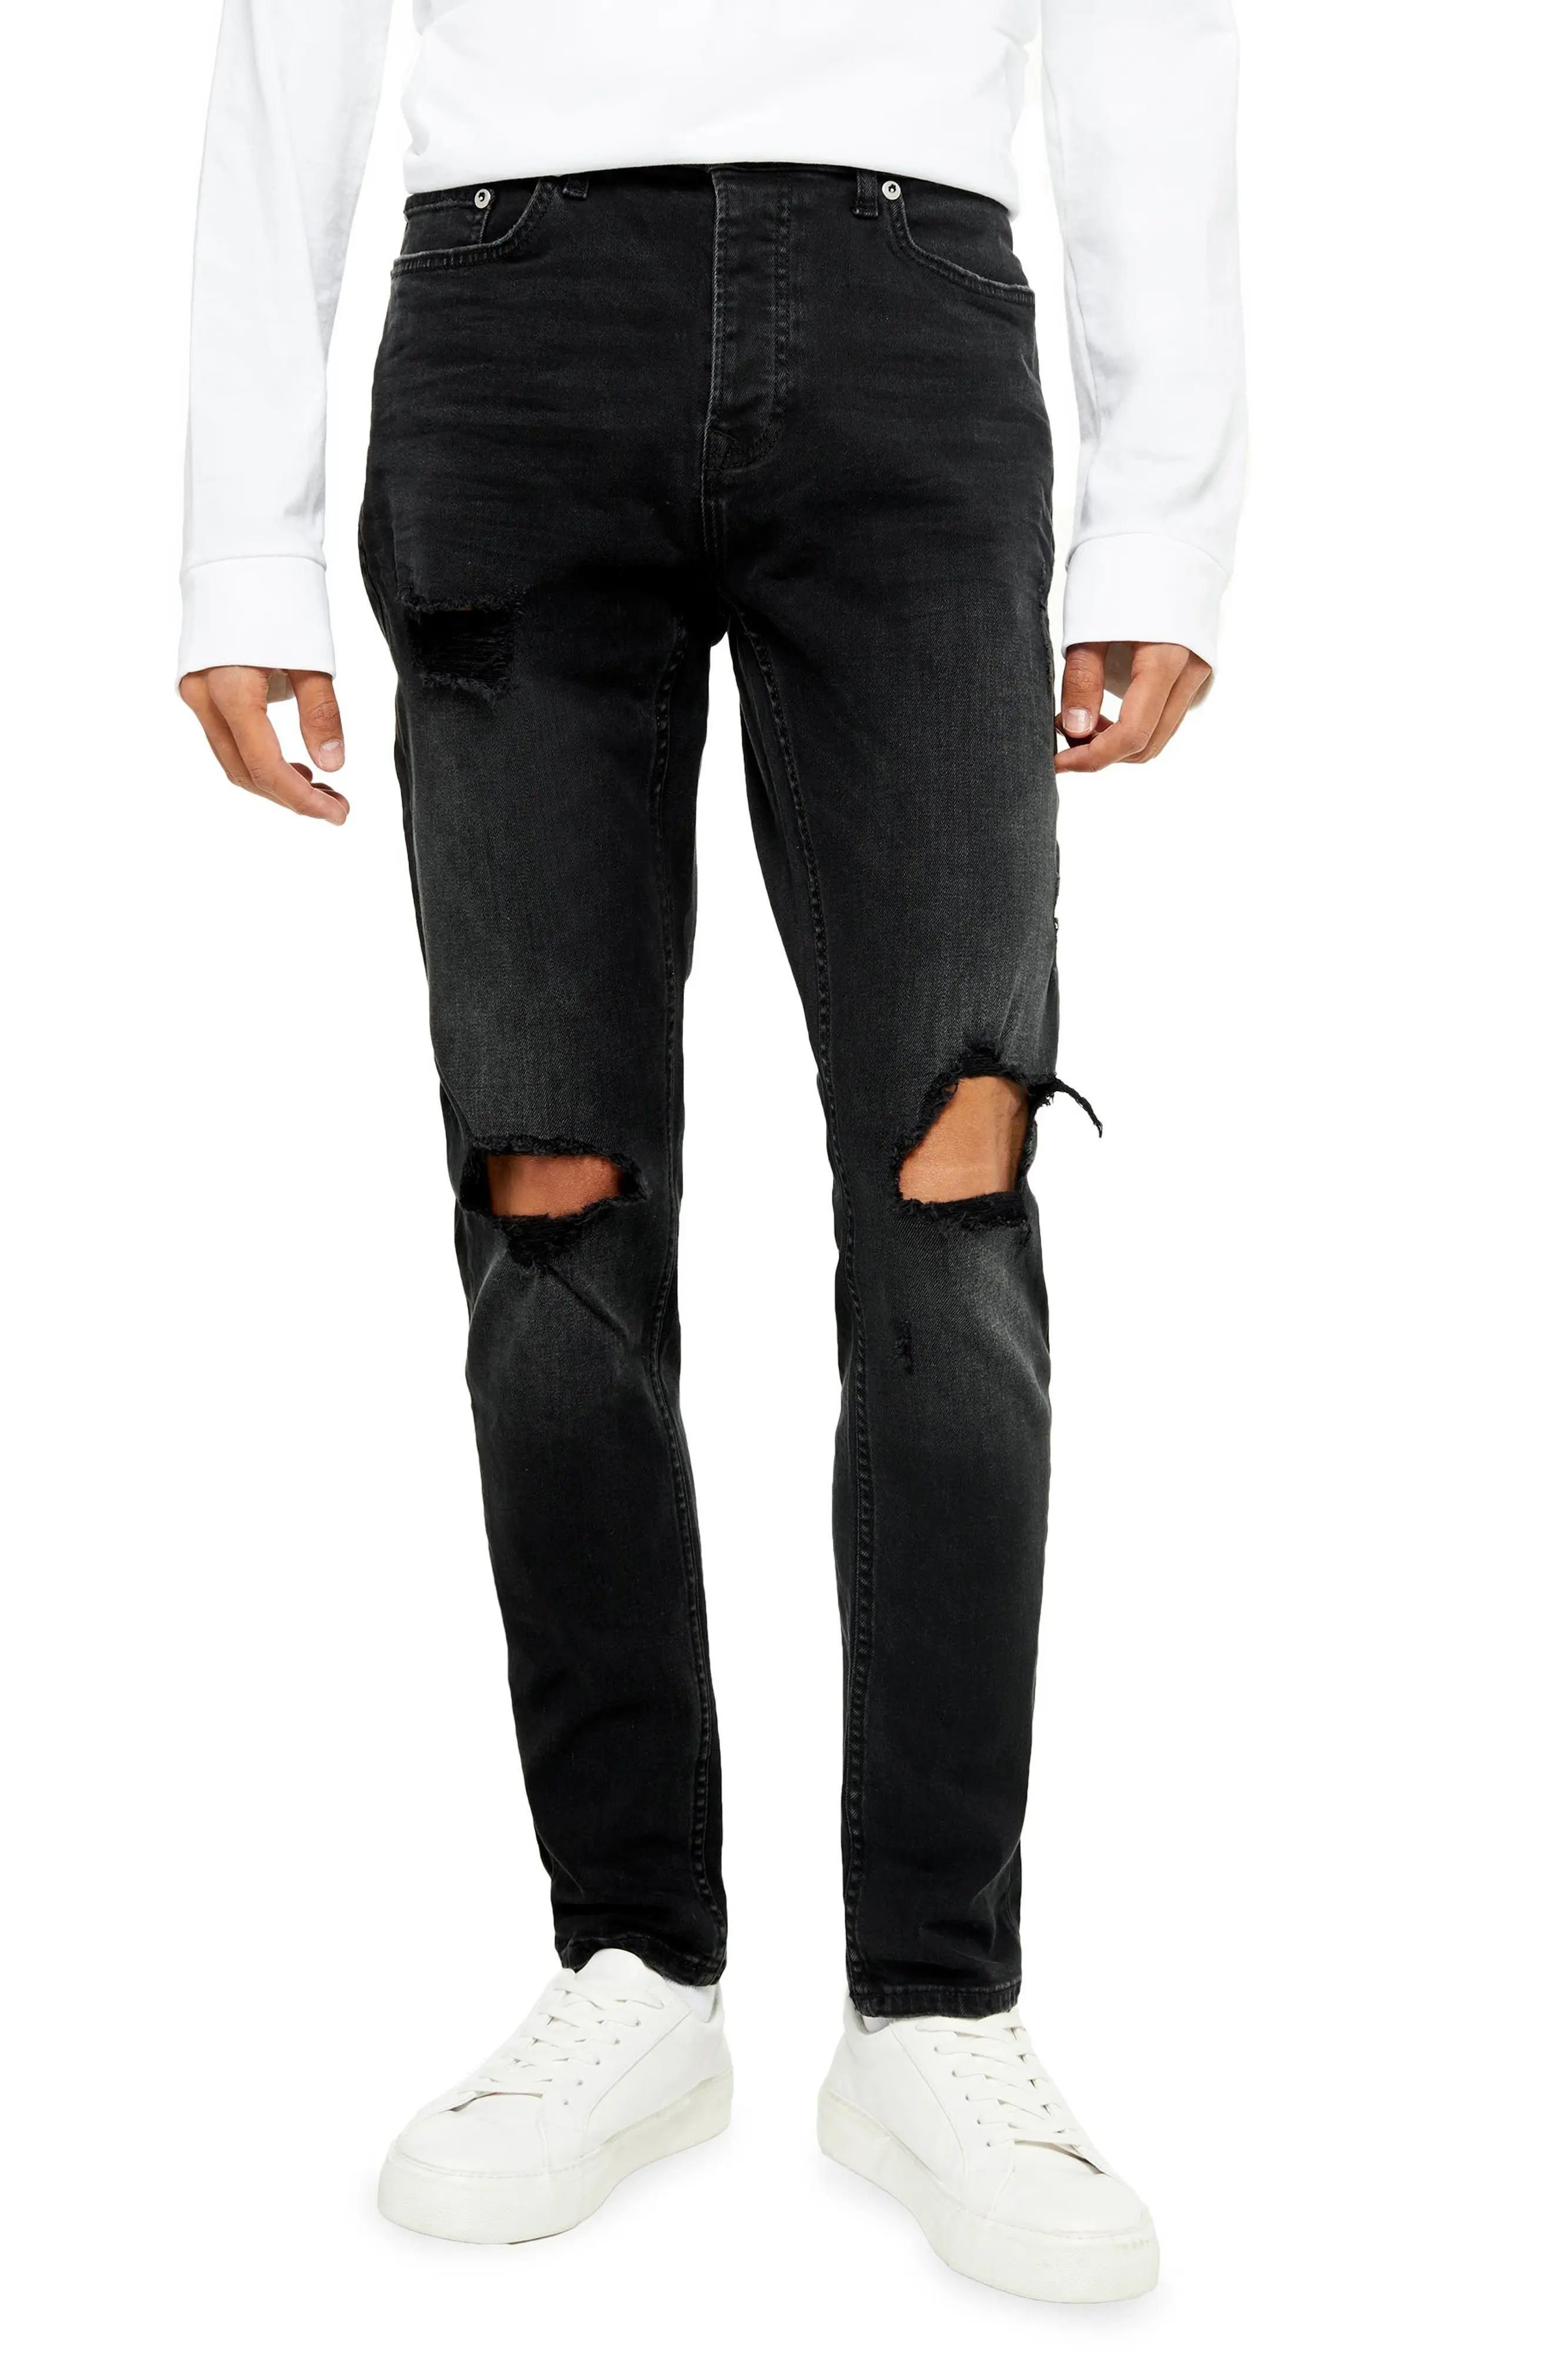 Men's Topman Washed Black Blowout Ripped Skinny Jeans, Size 36 x 34 - Black | Nordstrom